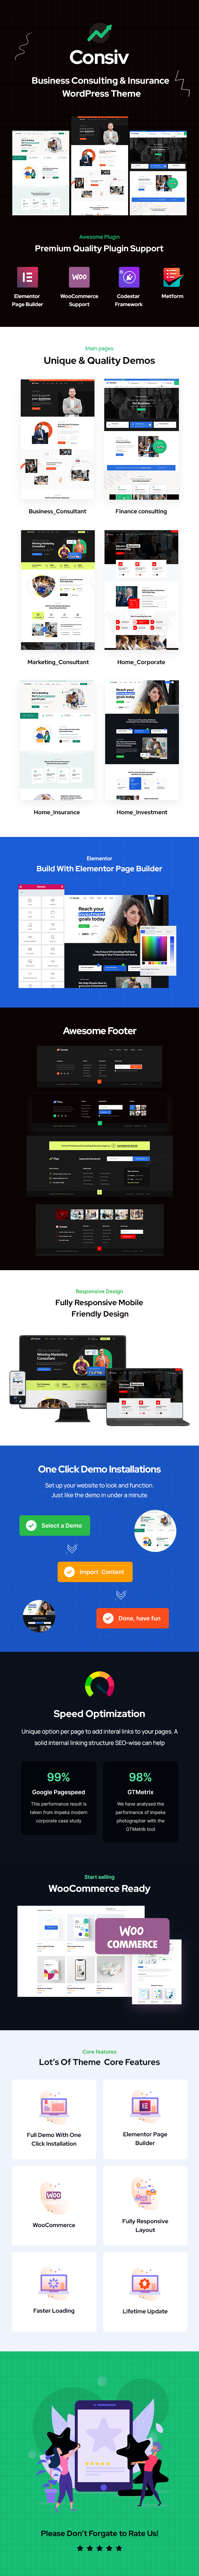 Convis - Consulting Business Elementor WordPress Theme - 1